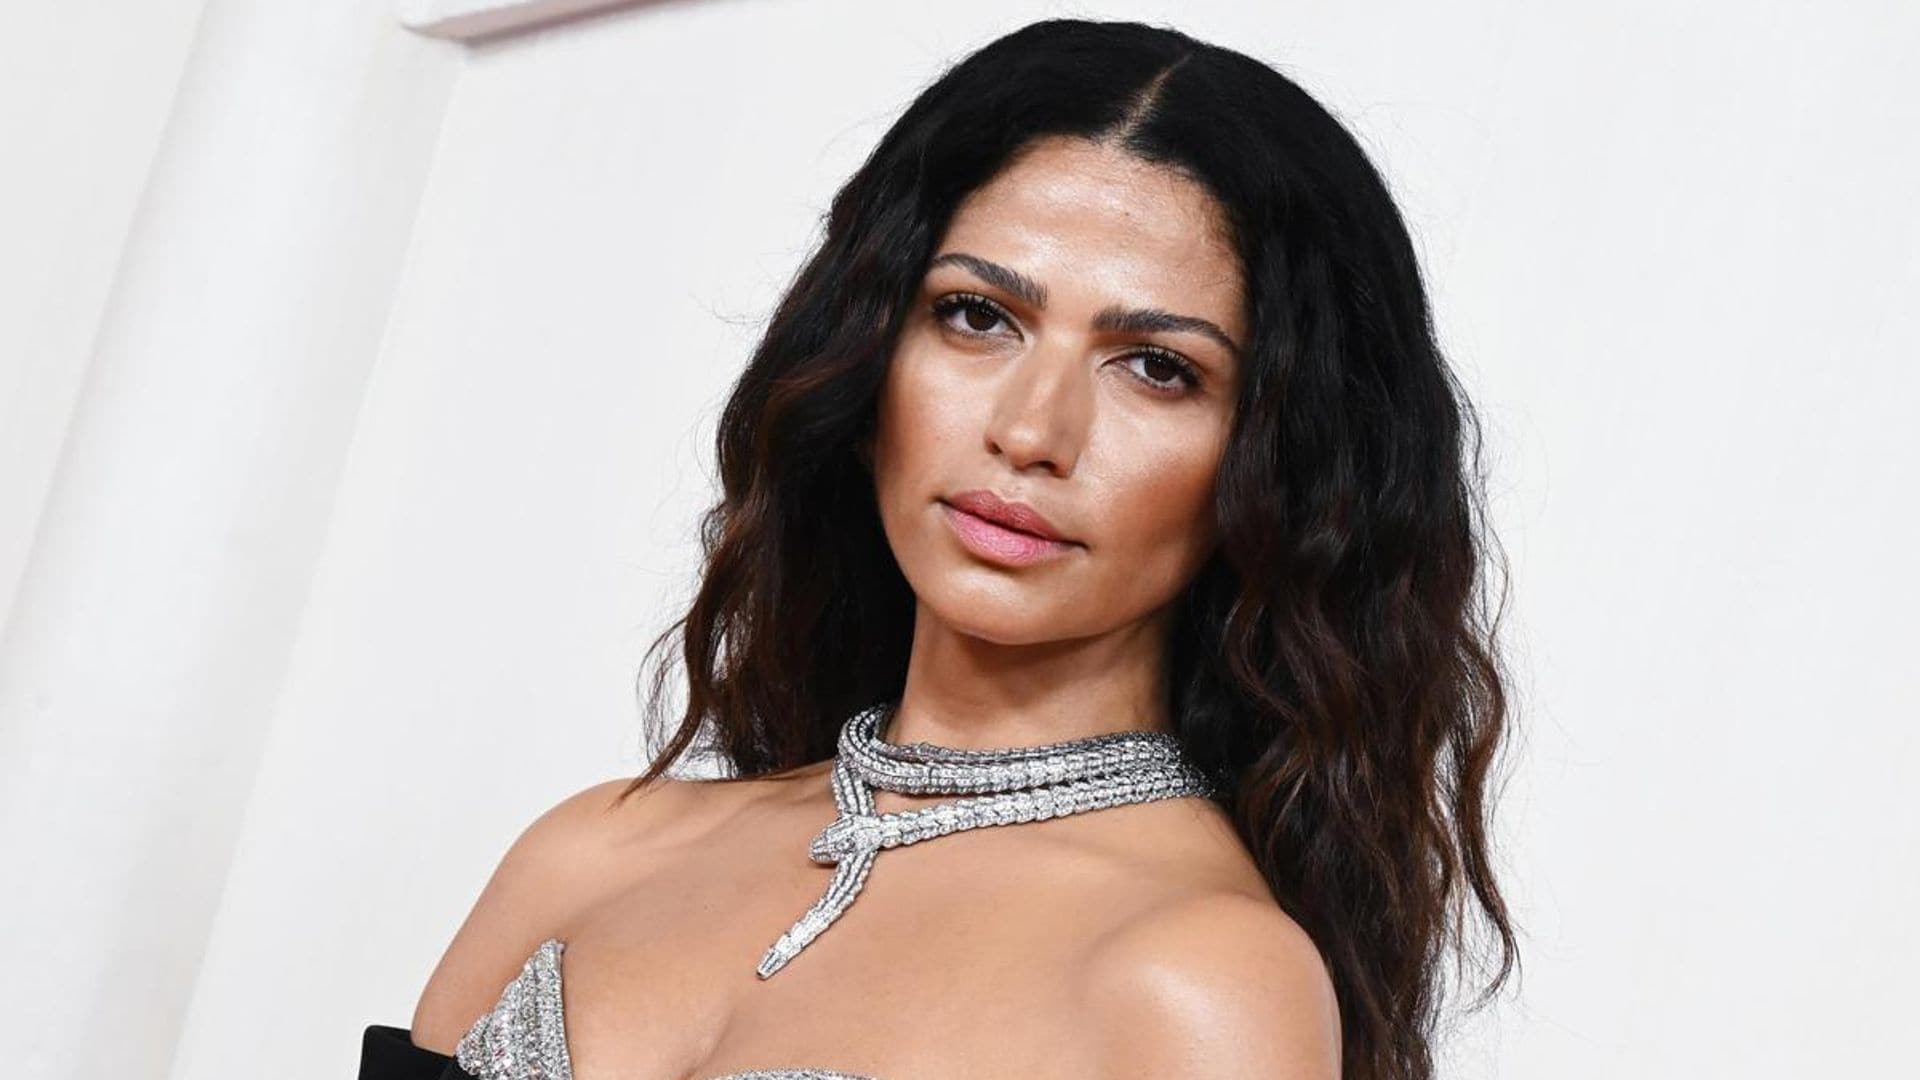 Camila Alves McConaughey’s food Instagram is the online community we didn’t know we needed